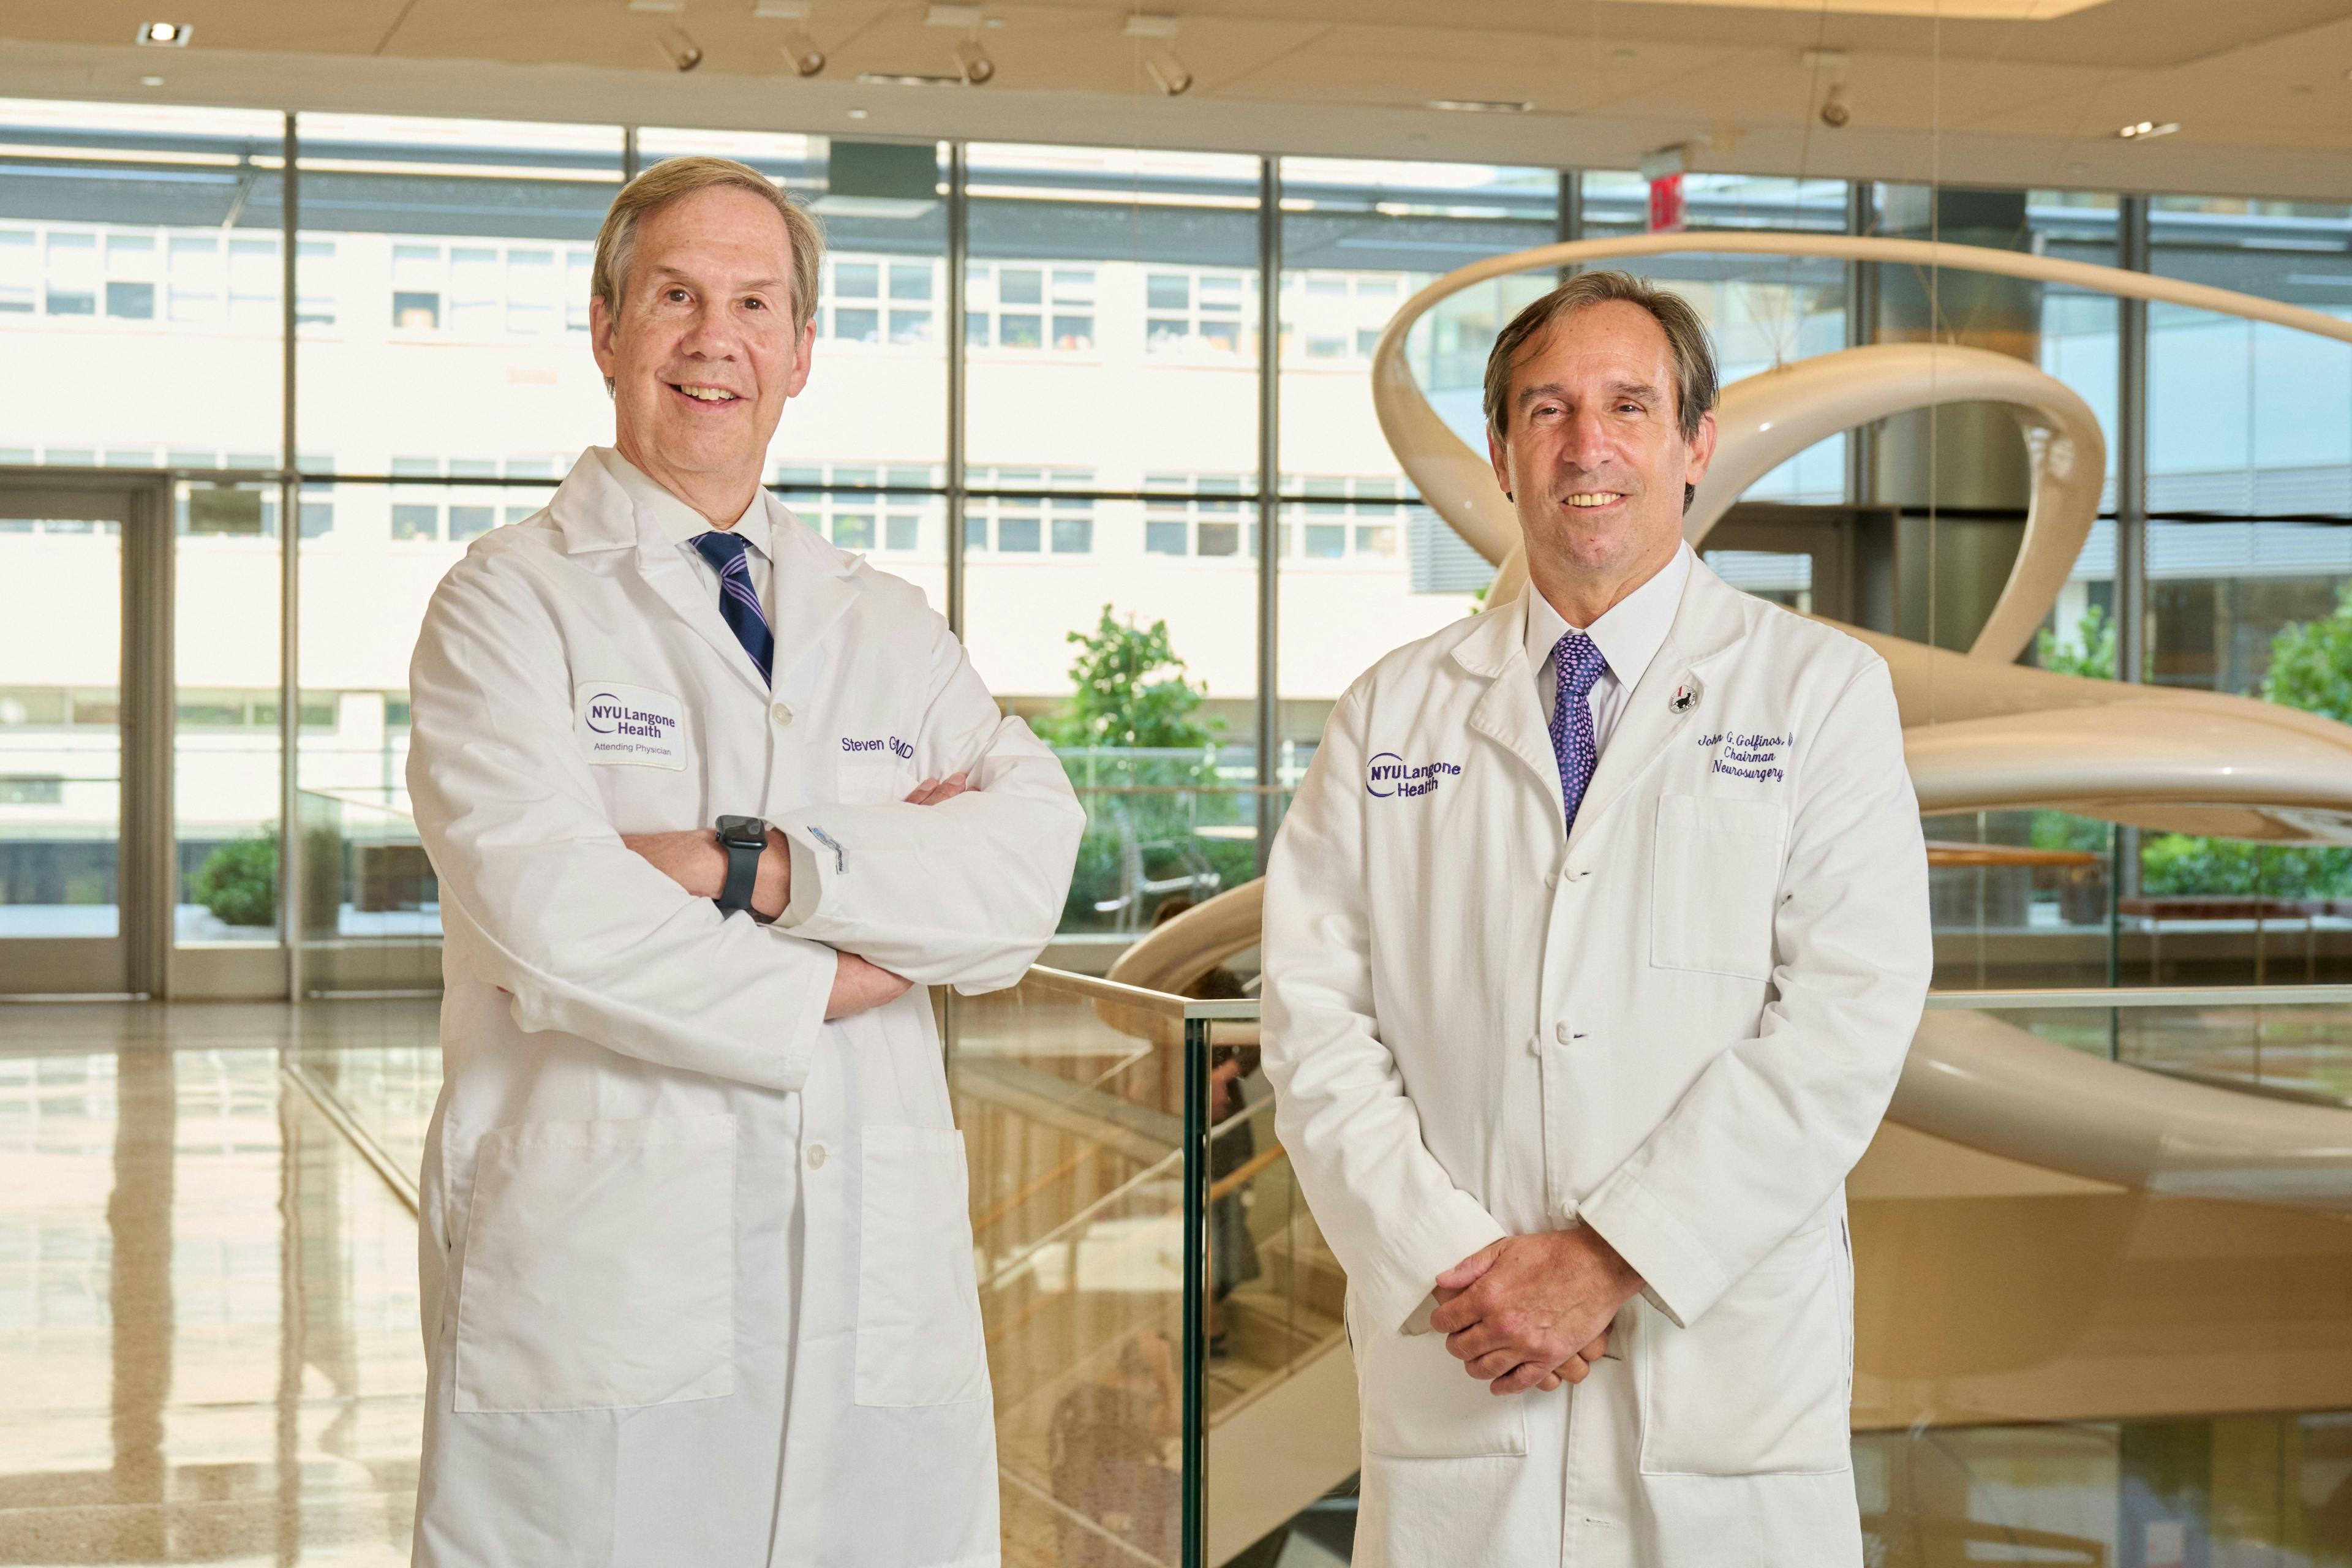 Steven L. Galetta, MD (left), the Philip K. Moskowitz, MD Professor and Chair of Neurology, and John G. Golfinos, MD , the Joseph Ransohoff Professor of Neurosurgery and the chair of the Department of Neurosurgery, in the lobby of NYU Langone Health's Science Building on July 21, 2022, in Manhattan.